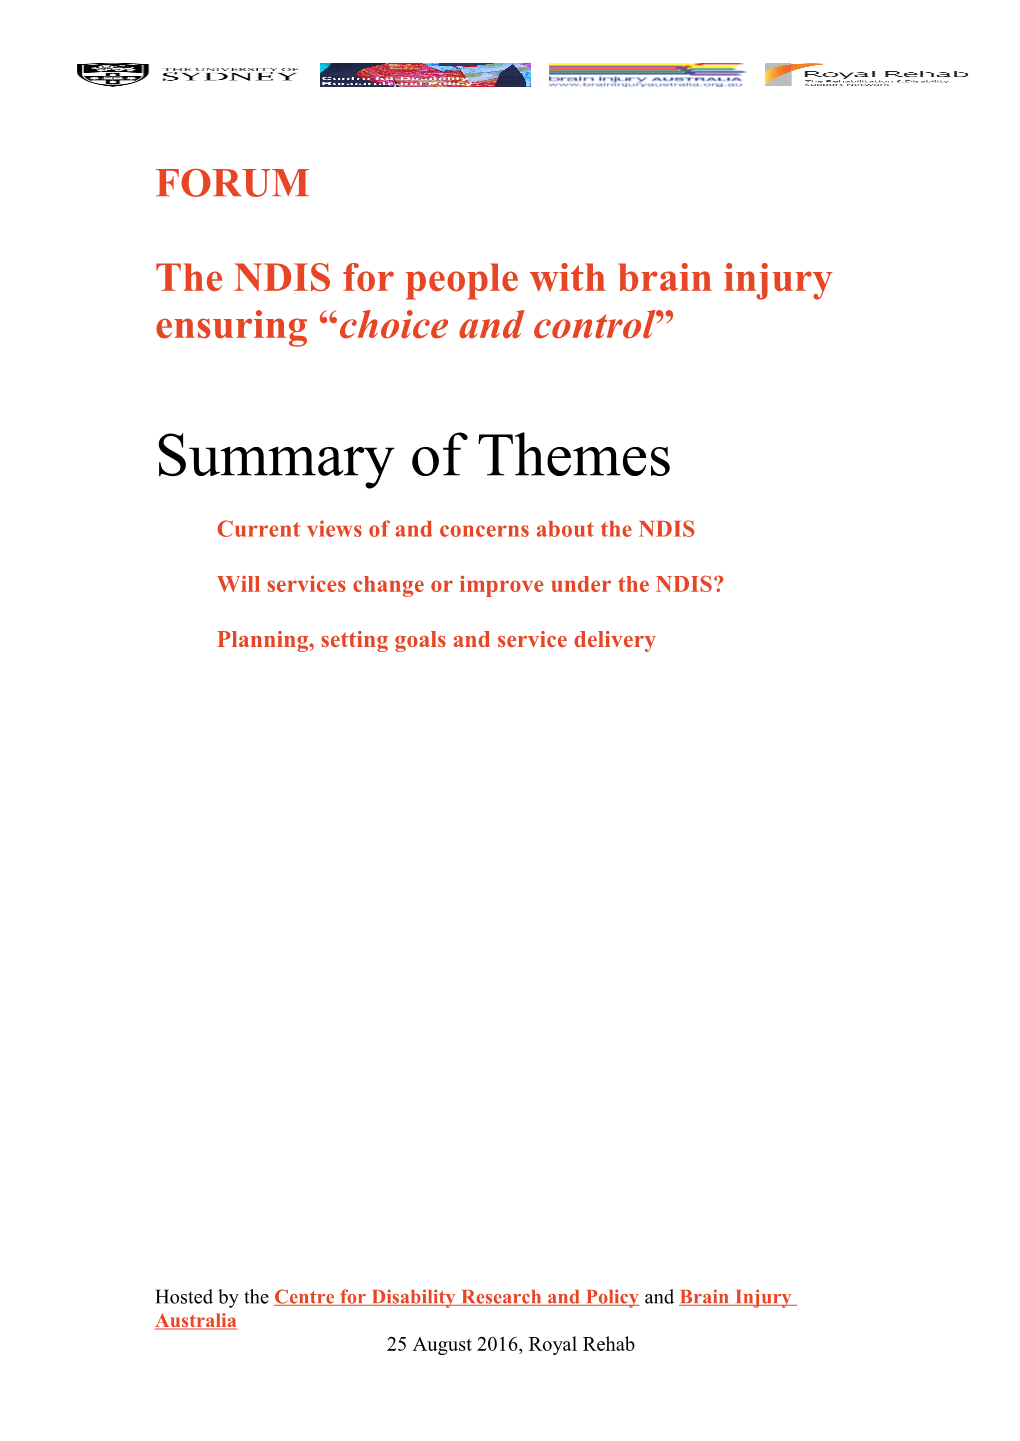 The NDIS for People with Brain Injury Ensuring Choice and Control